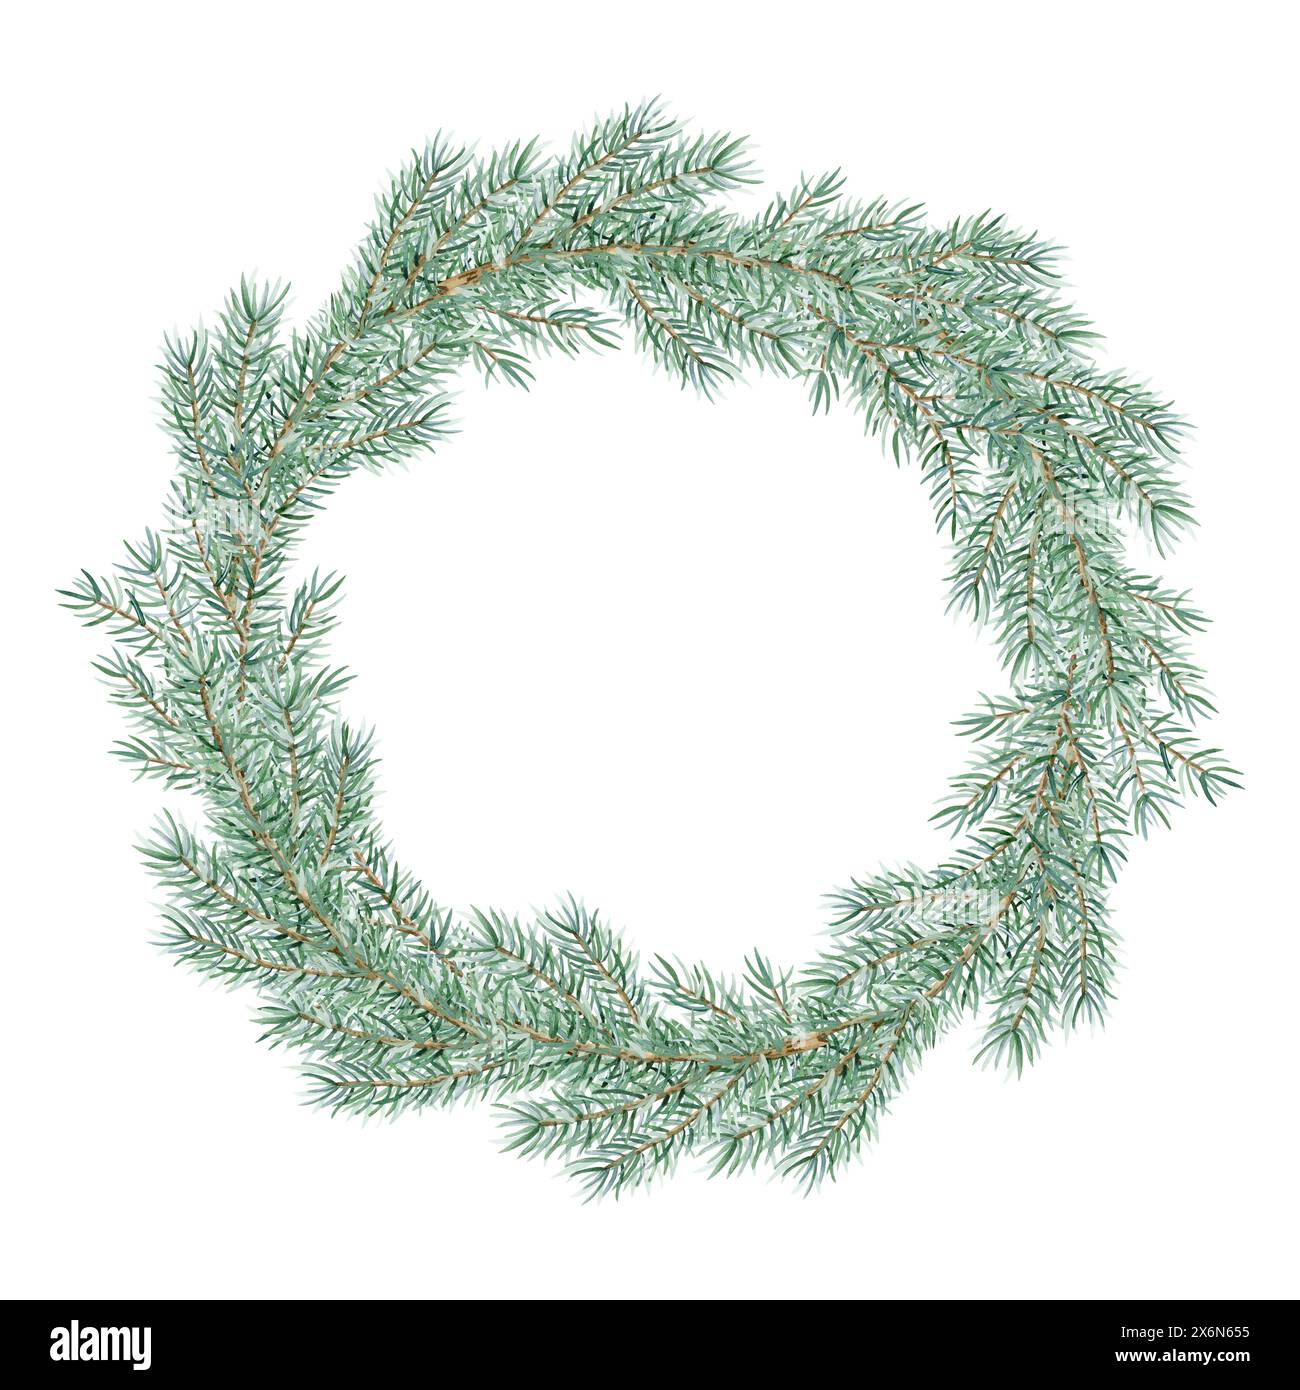 Pine tree branches lush round wreath frame watercolor illustration for winter holidays greeting templates and cards Stock Photo